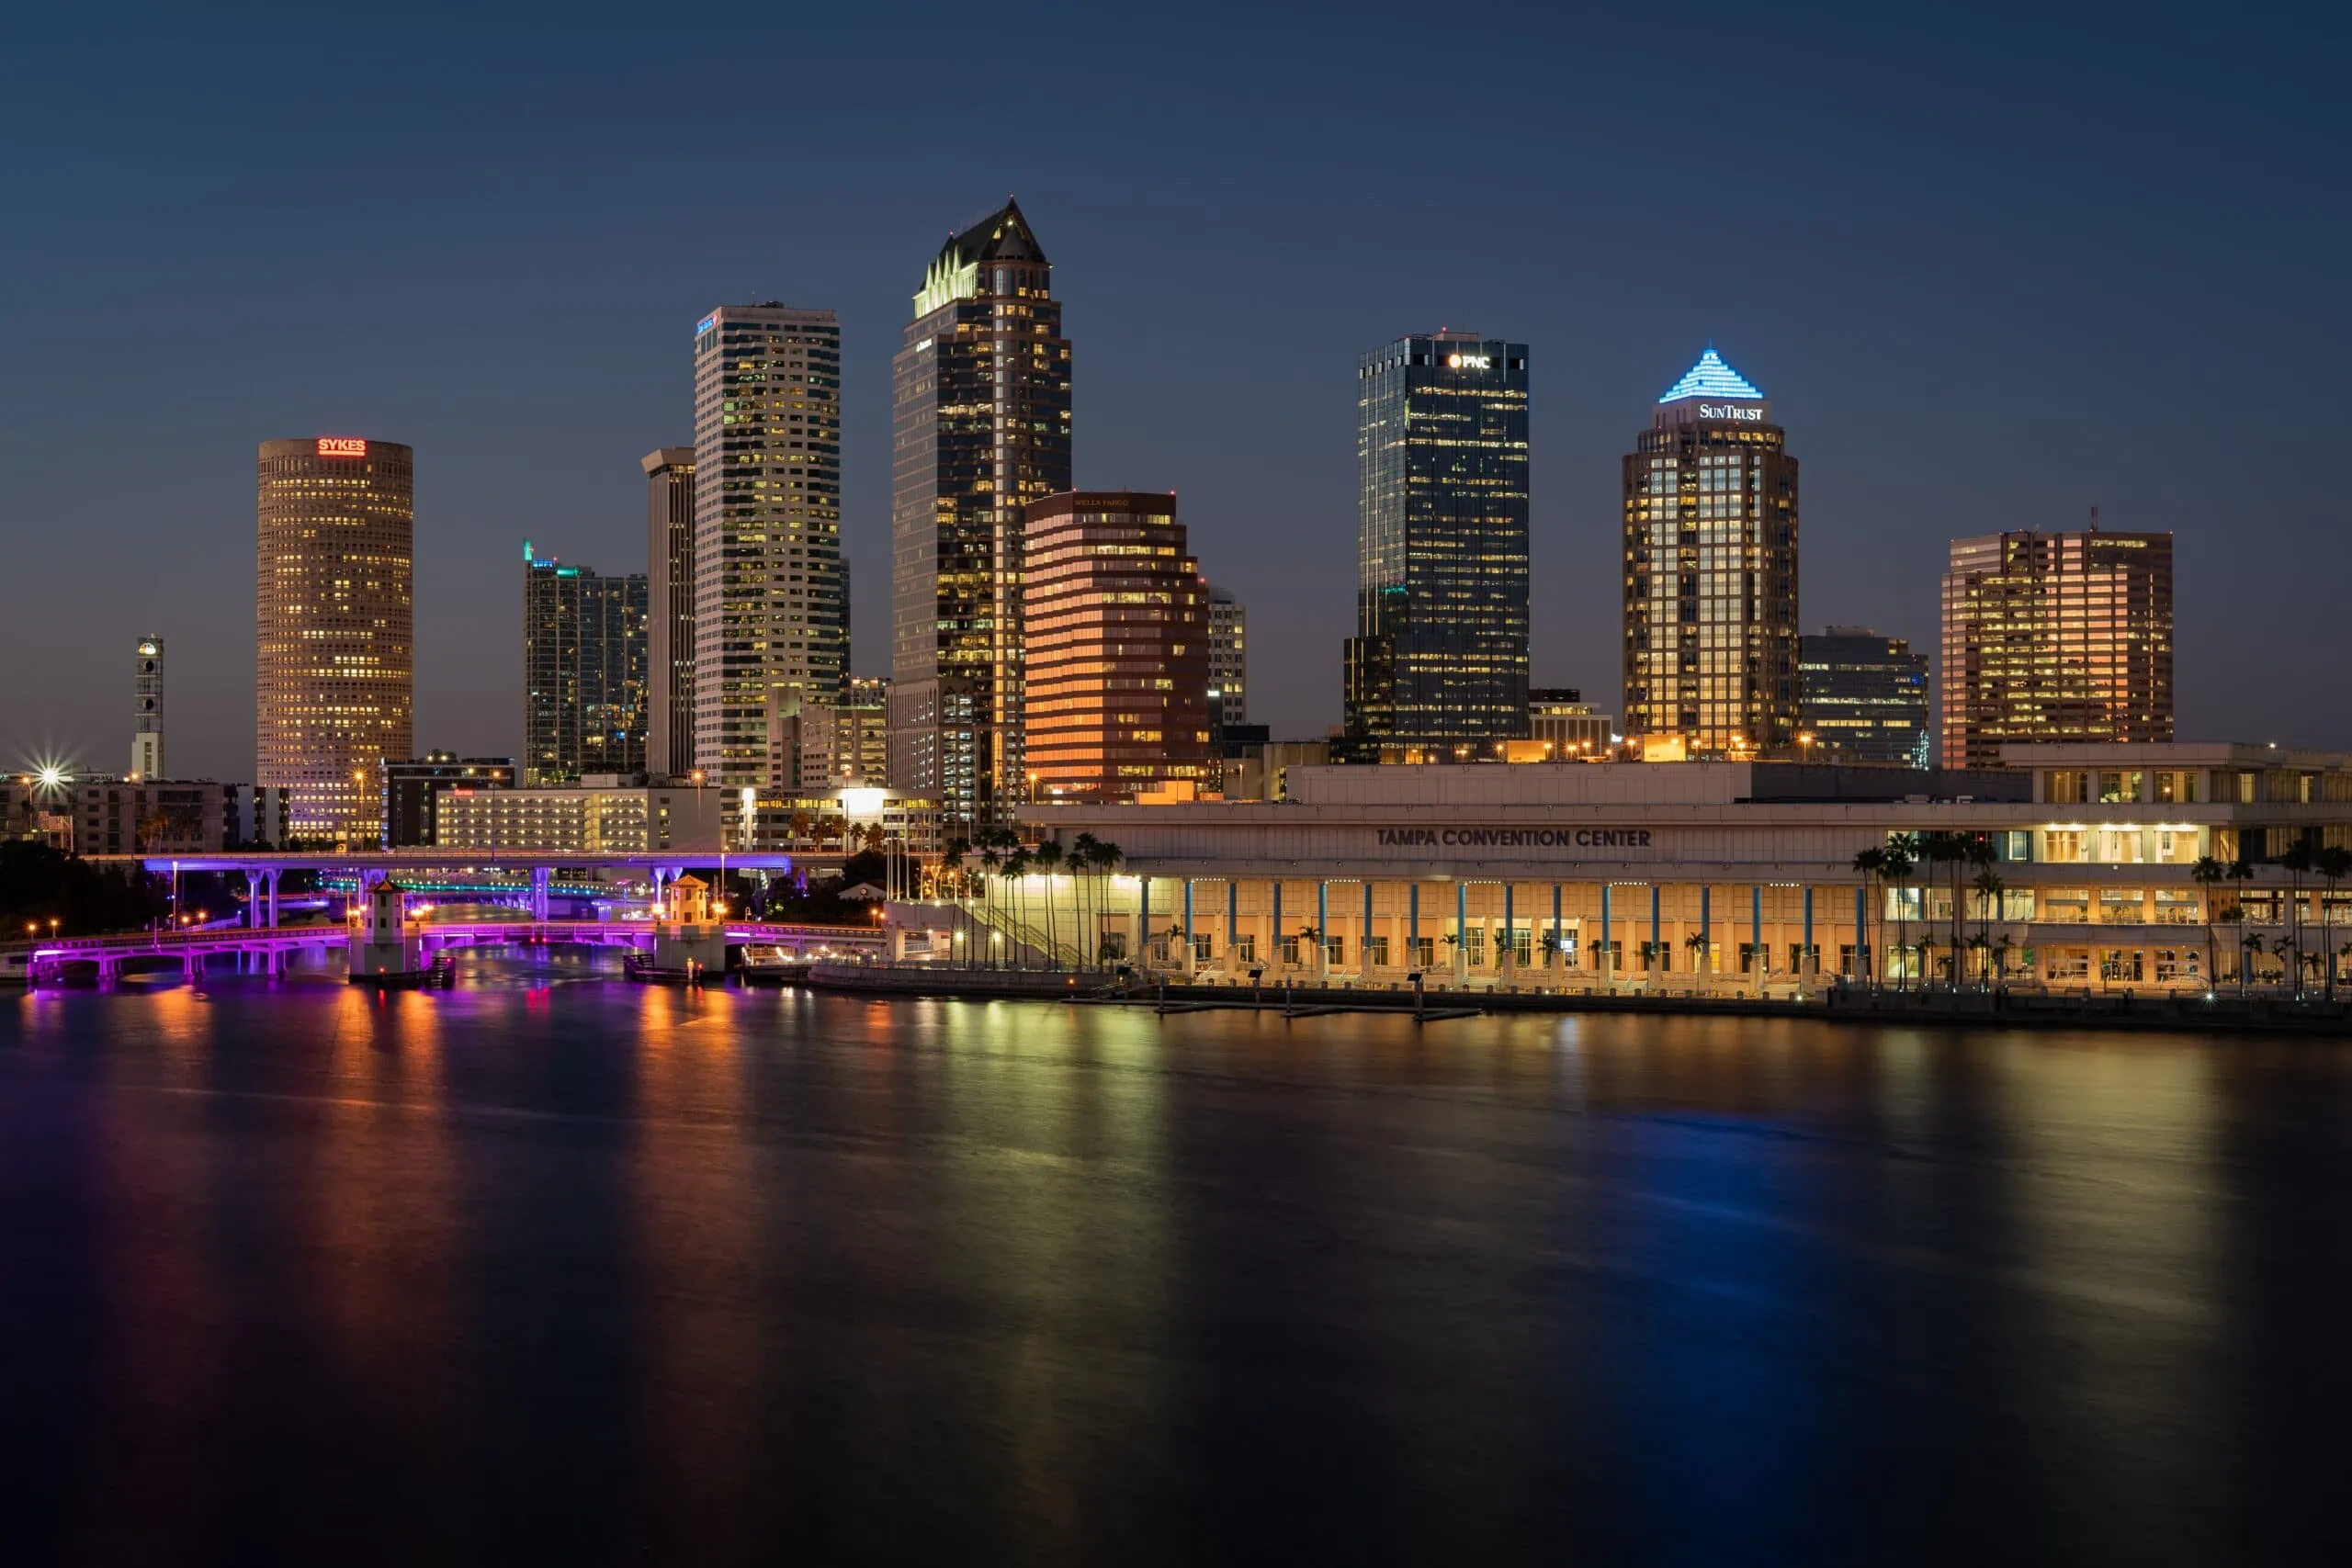 Skyline of Tampa, FL with enterprises with business cameras